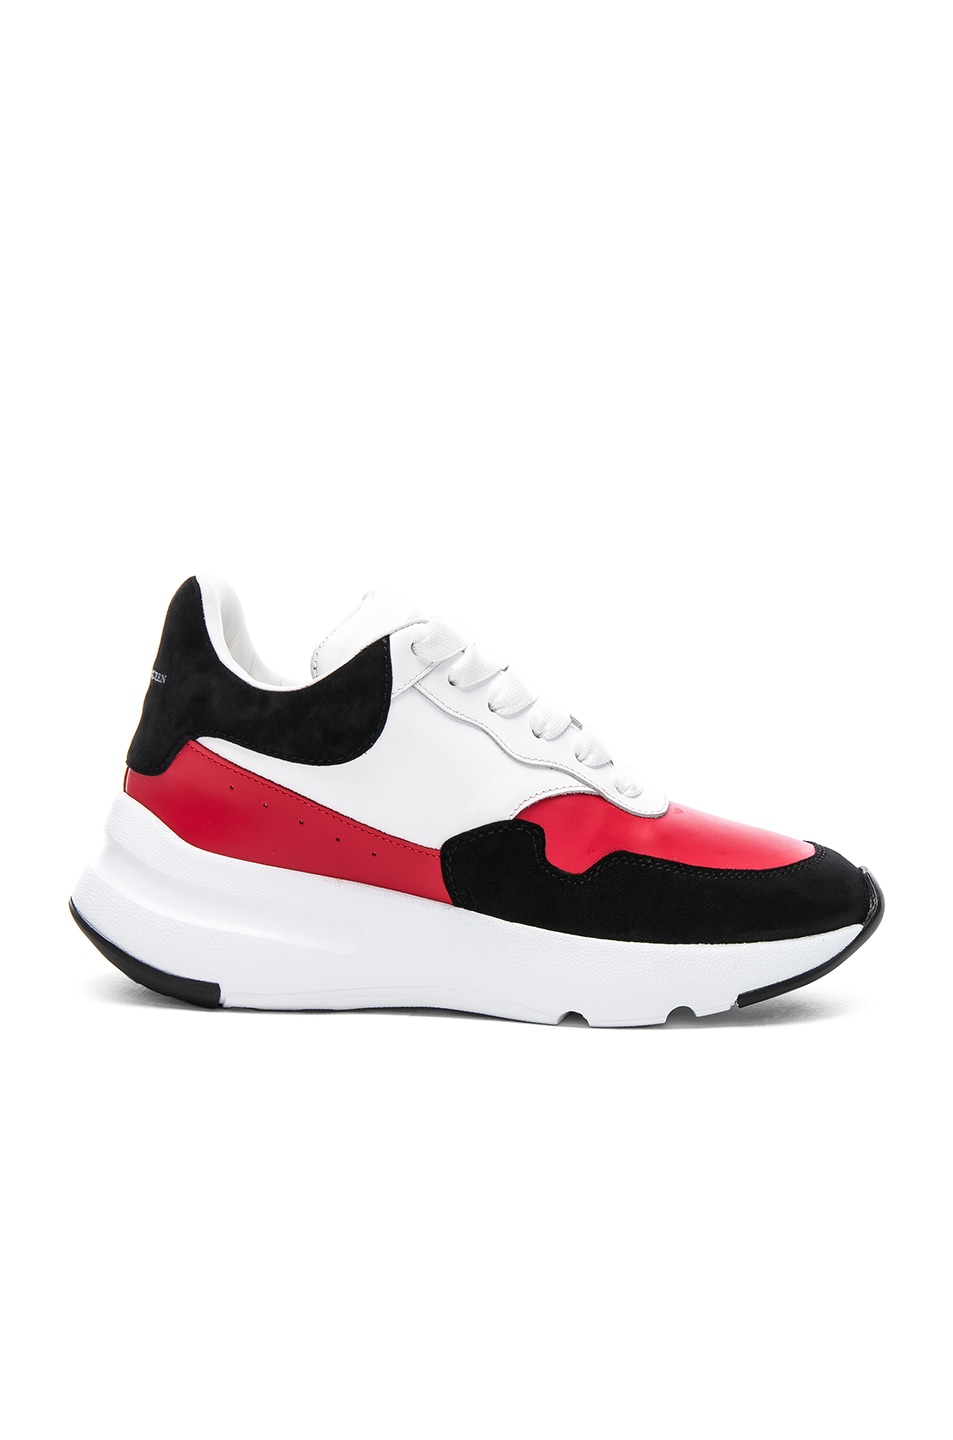 Image 1 of Alexander McQueen Leather & Suede Lace Up Sneakers in Black, Lust Red & White